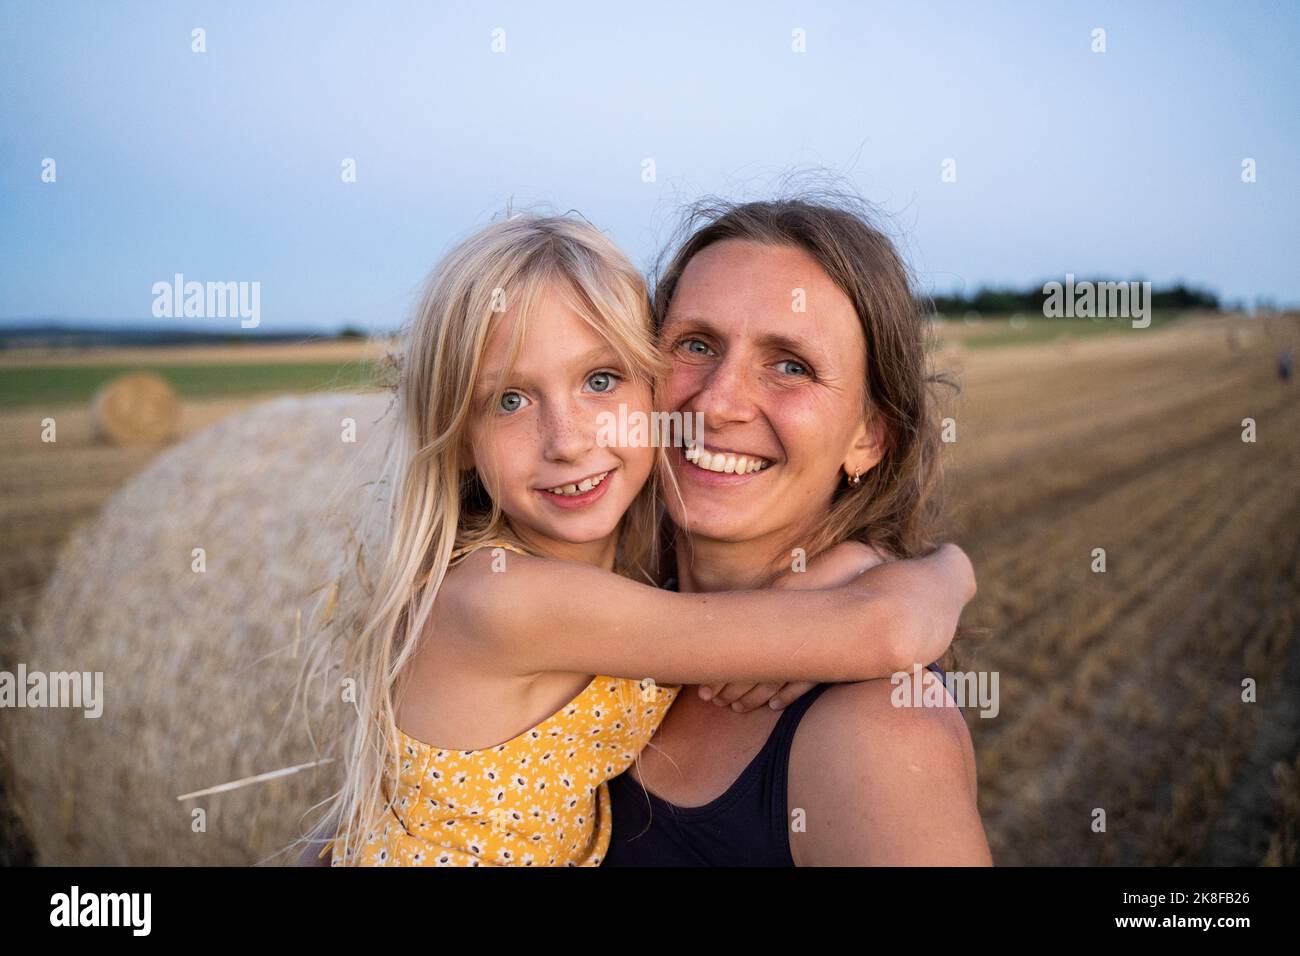 Smiling girl with blond hair embracing mother at field Stock Photo